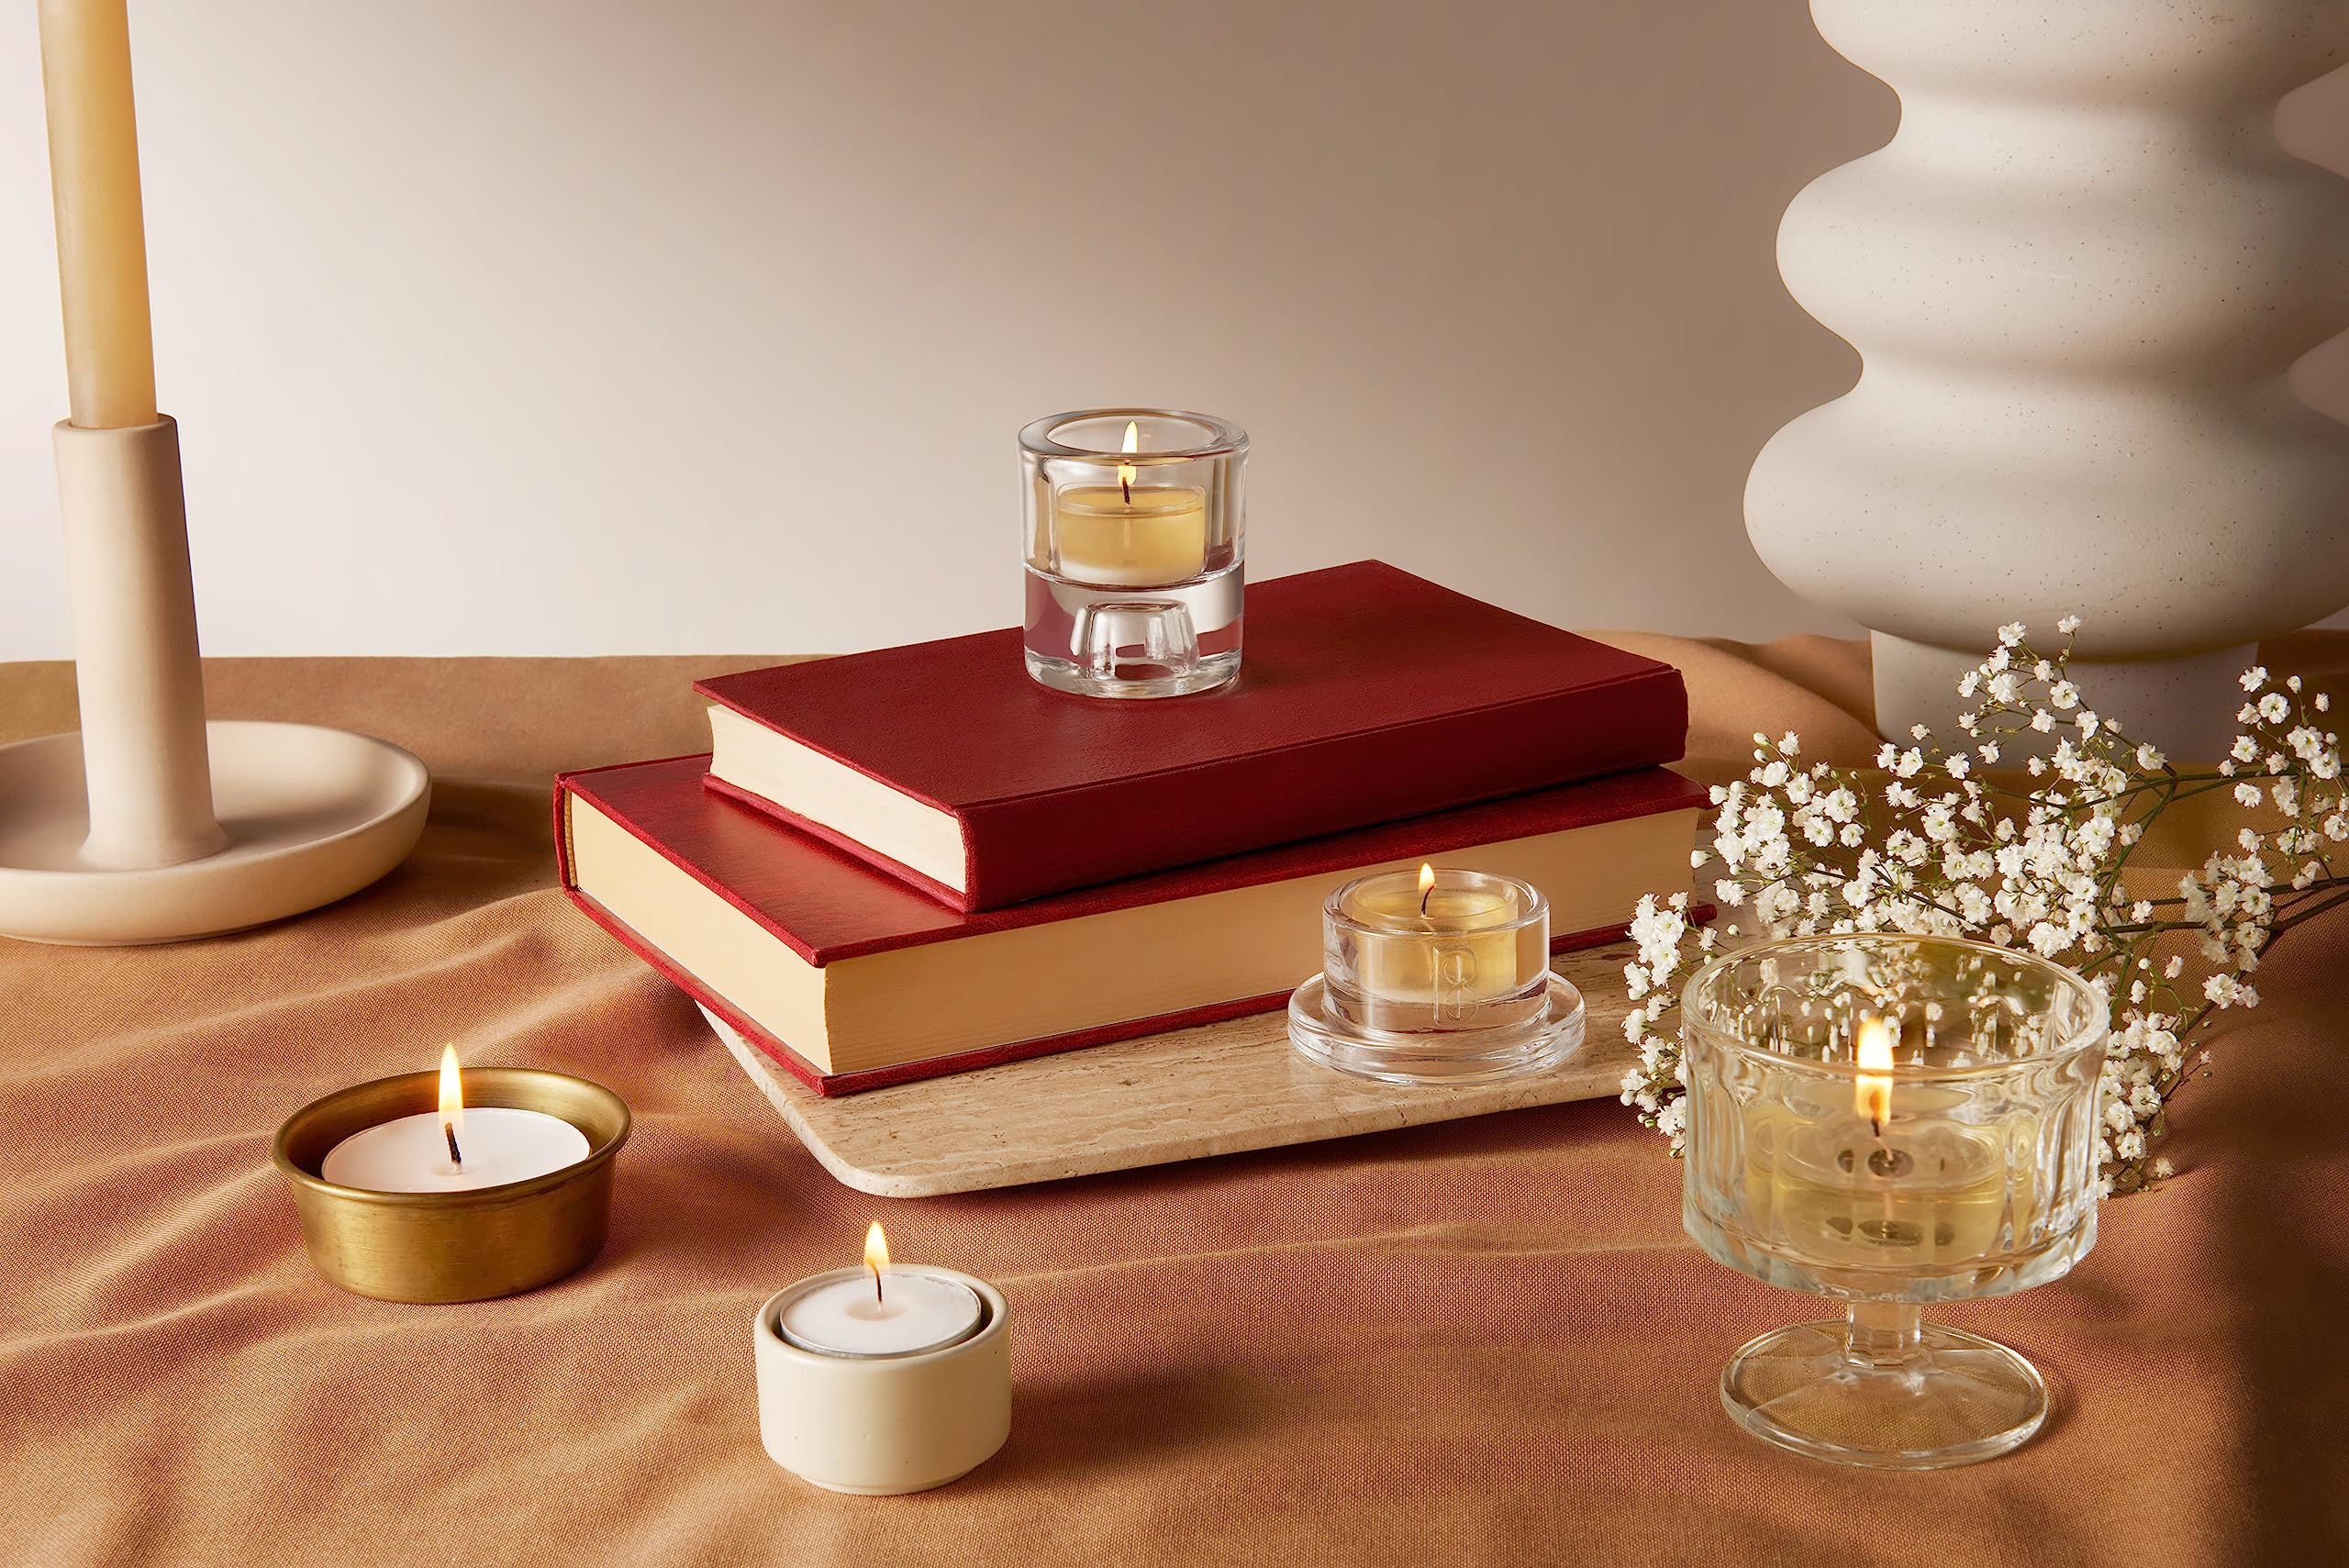 BOLSIUS Tea Light Candles in Clear Cups - Premium European Quality - Consistent Smokeless Flame - Unscented Tealights  - Like New